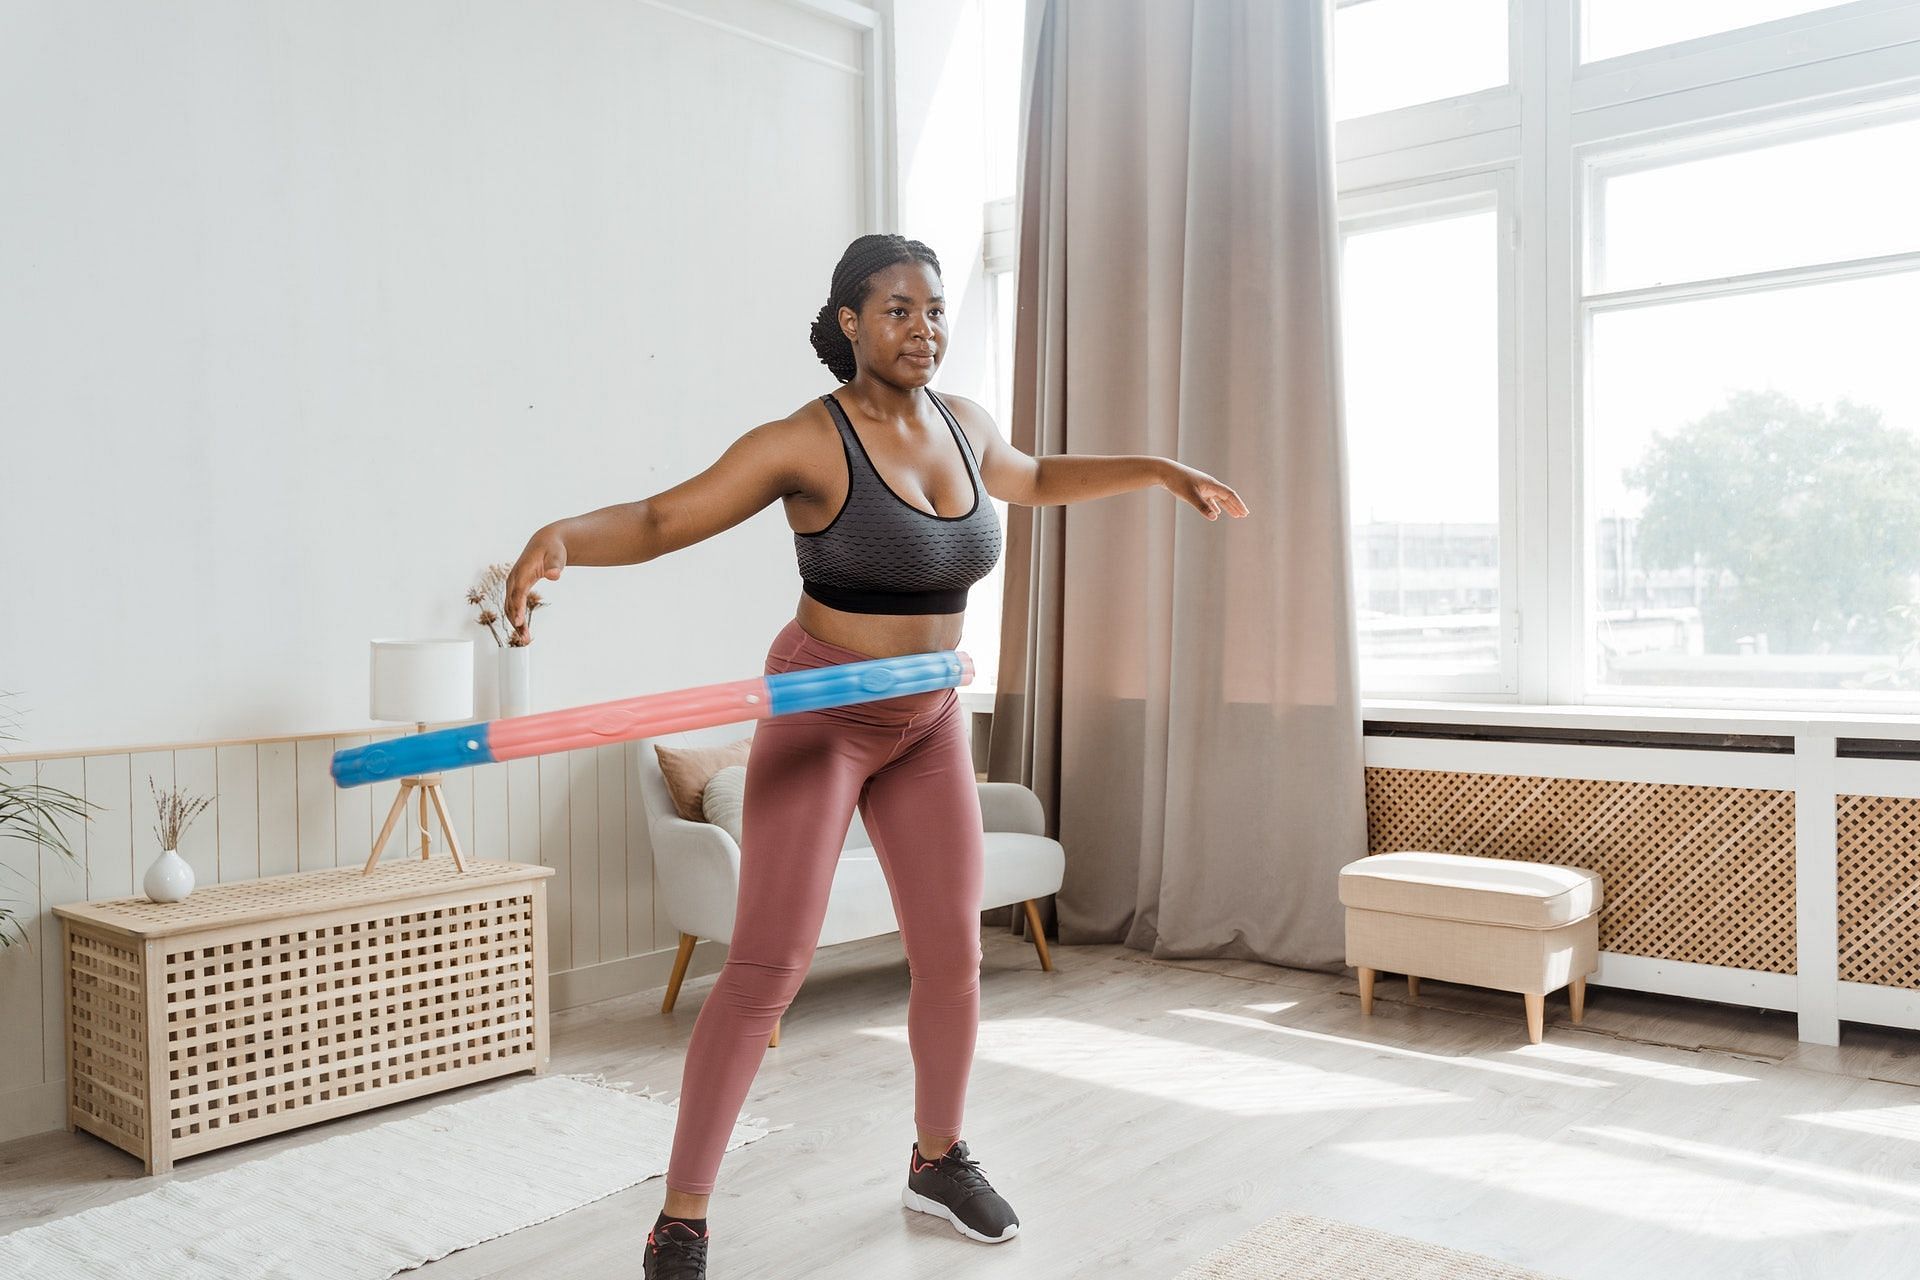 Weighted hula hooping offers some great health advantages. (Photo by MART PRODUCTION via pexels)